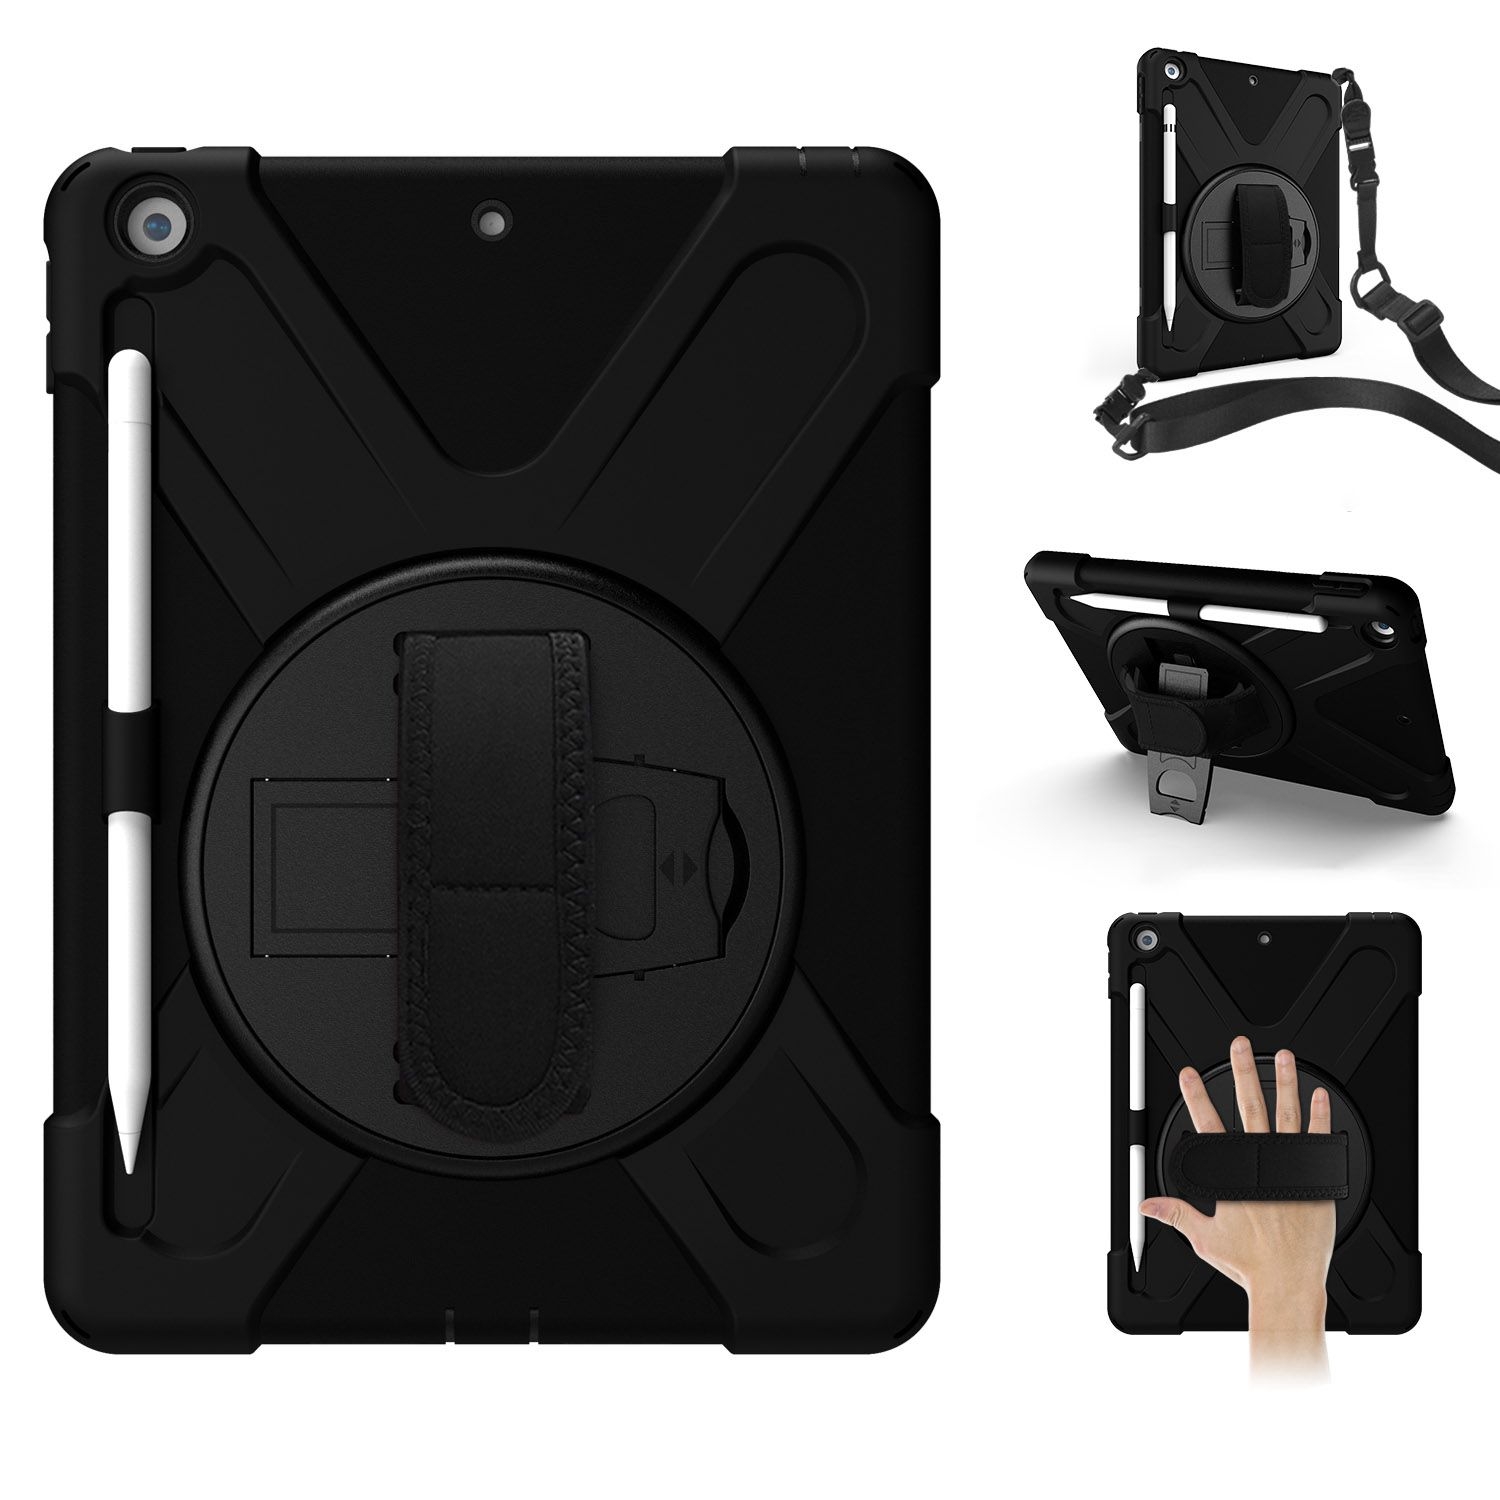 Rugged case for the iPad 10.2 with hand & shoulder strap, kick stand and glass screen protector